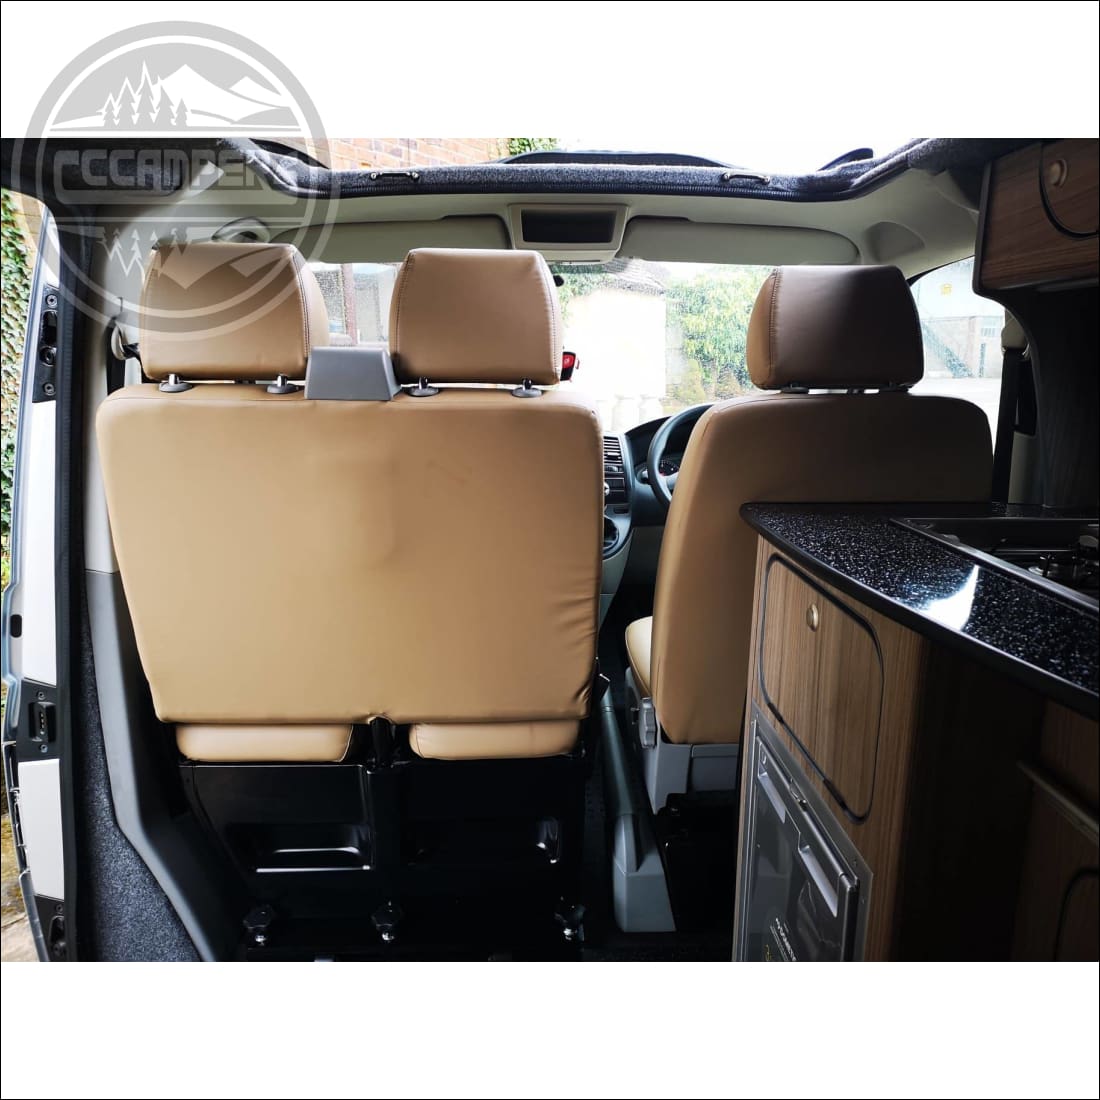 Front Seats Upholstered To Match Rear - cccampers.myshopify.com